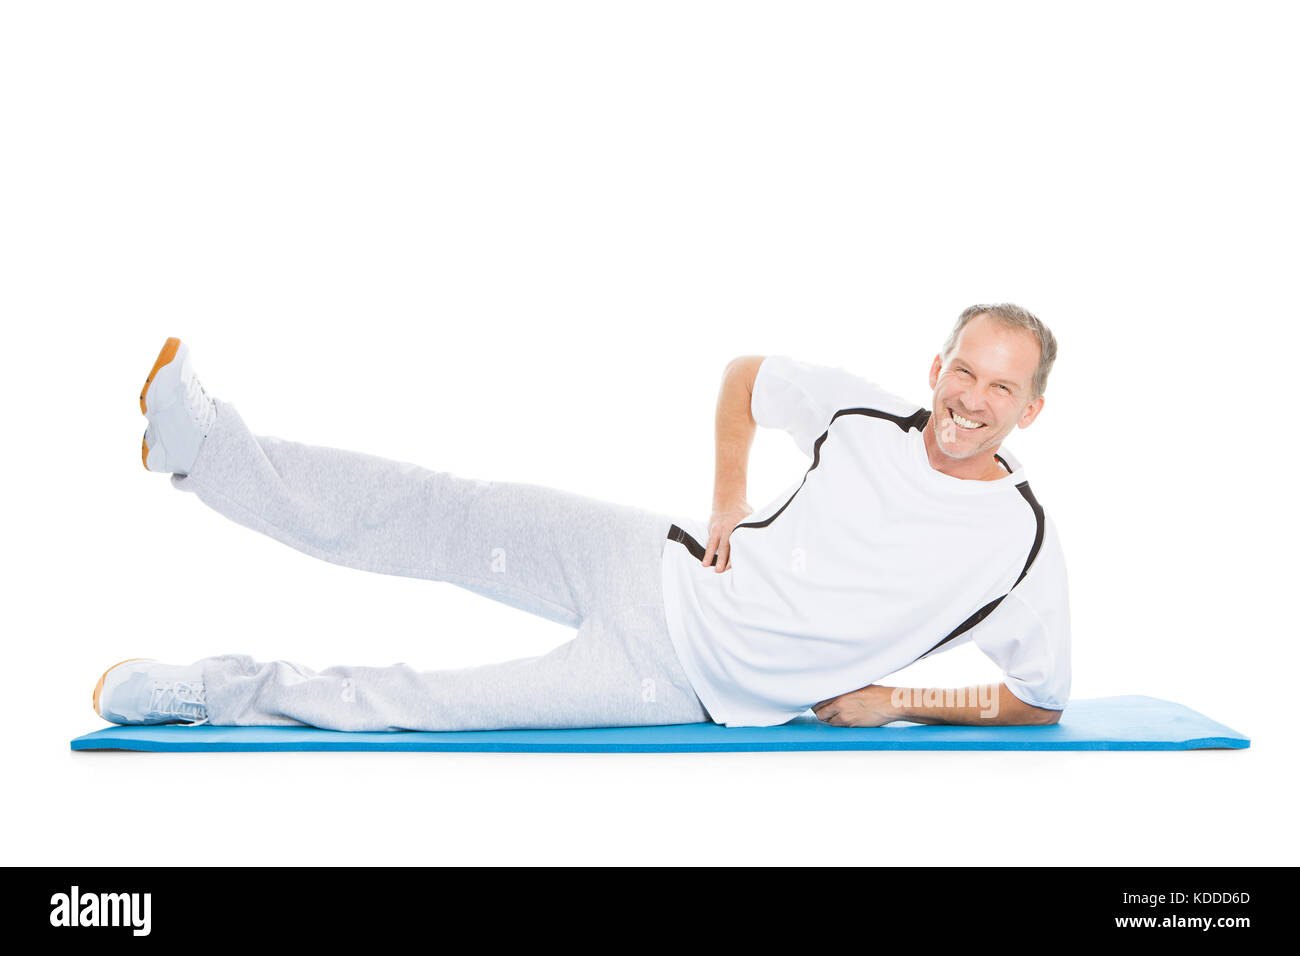 Portrait Of Mature Man Stretching Leg Lying On Exercise Mat Banque D'Images